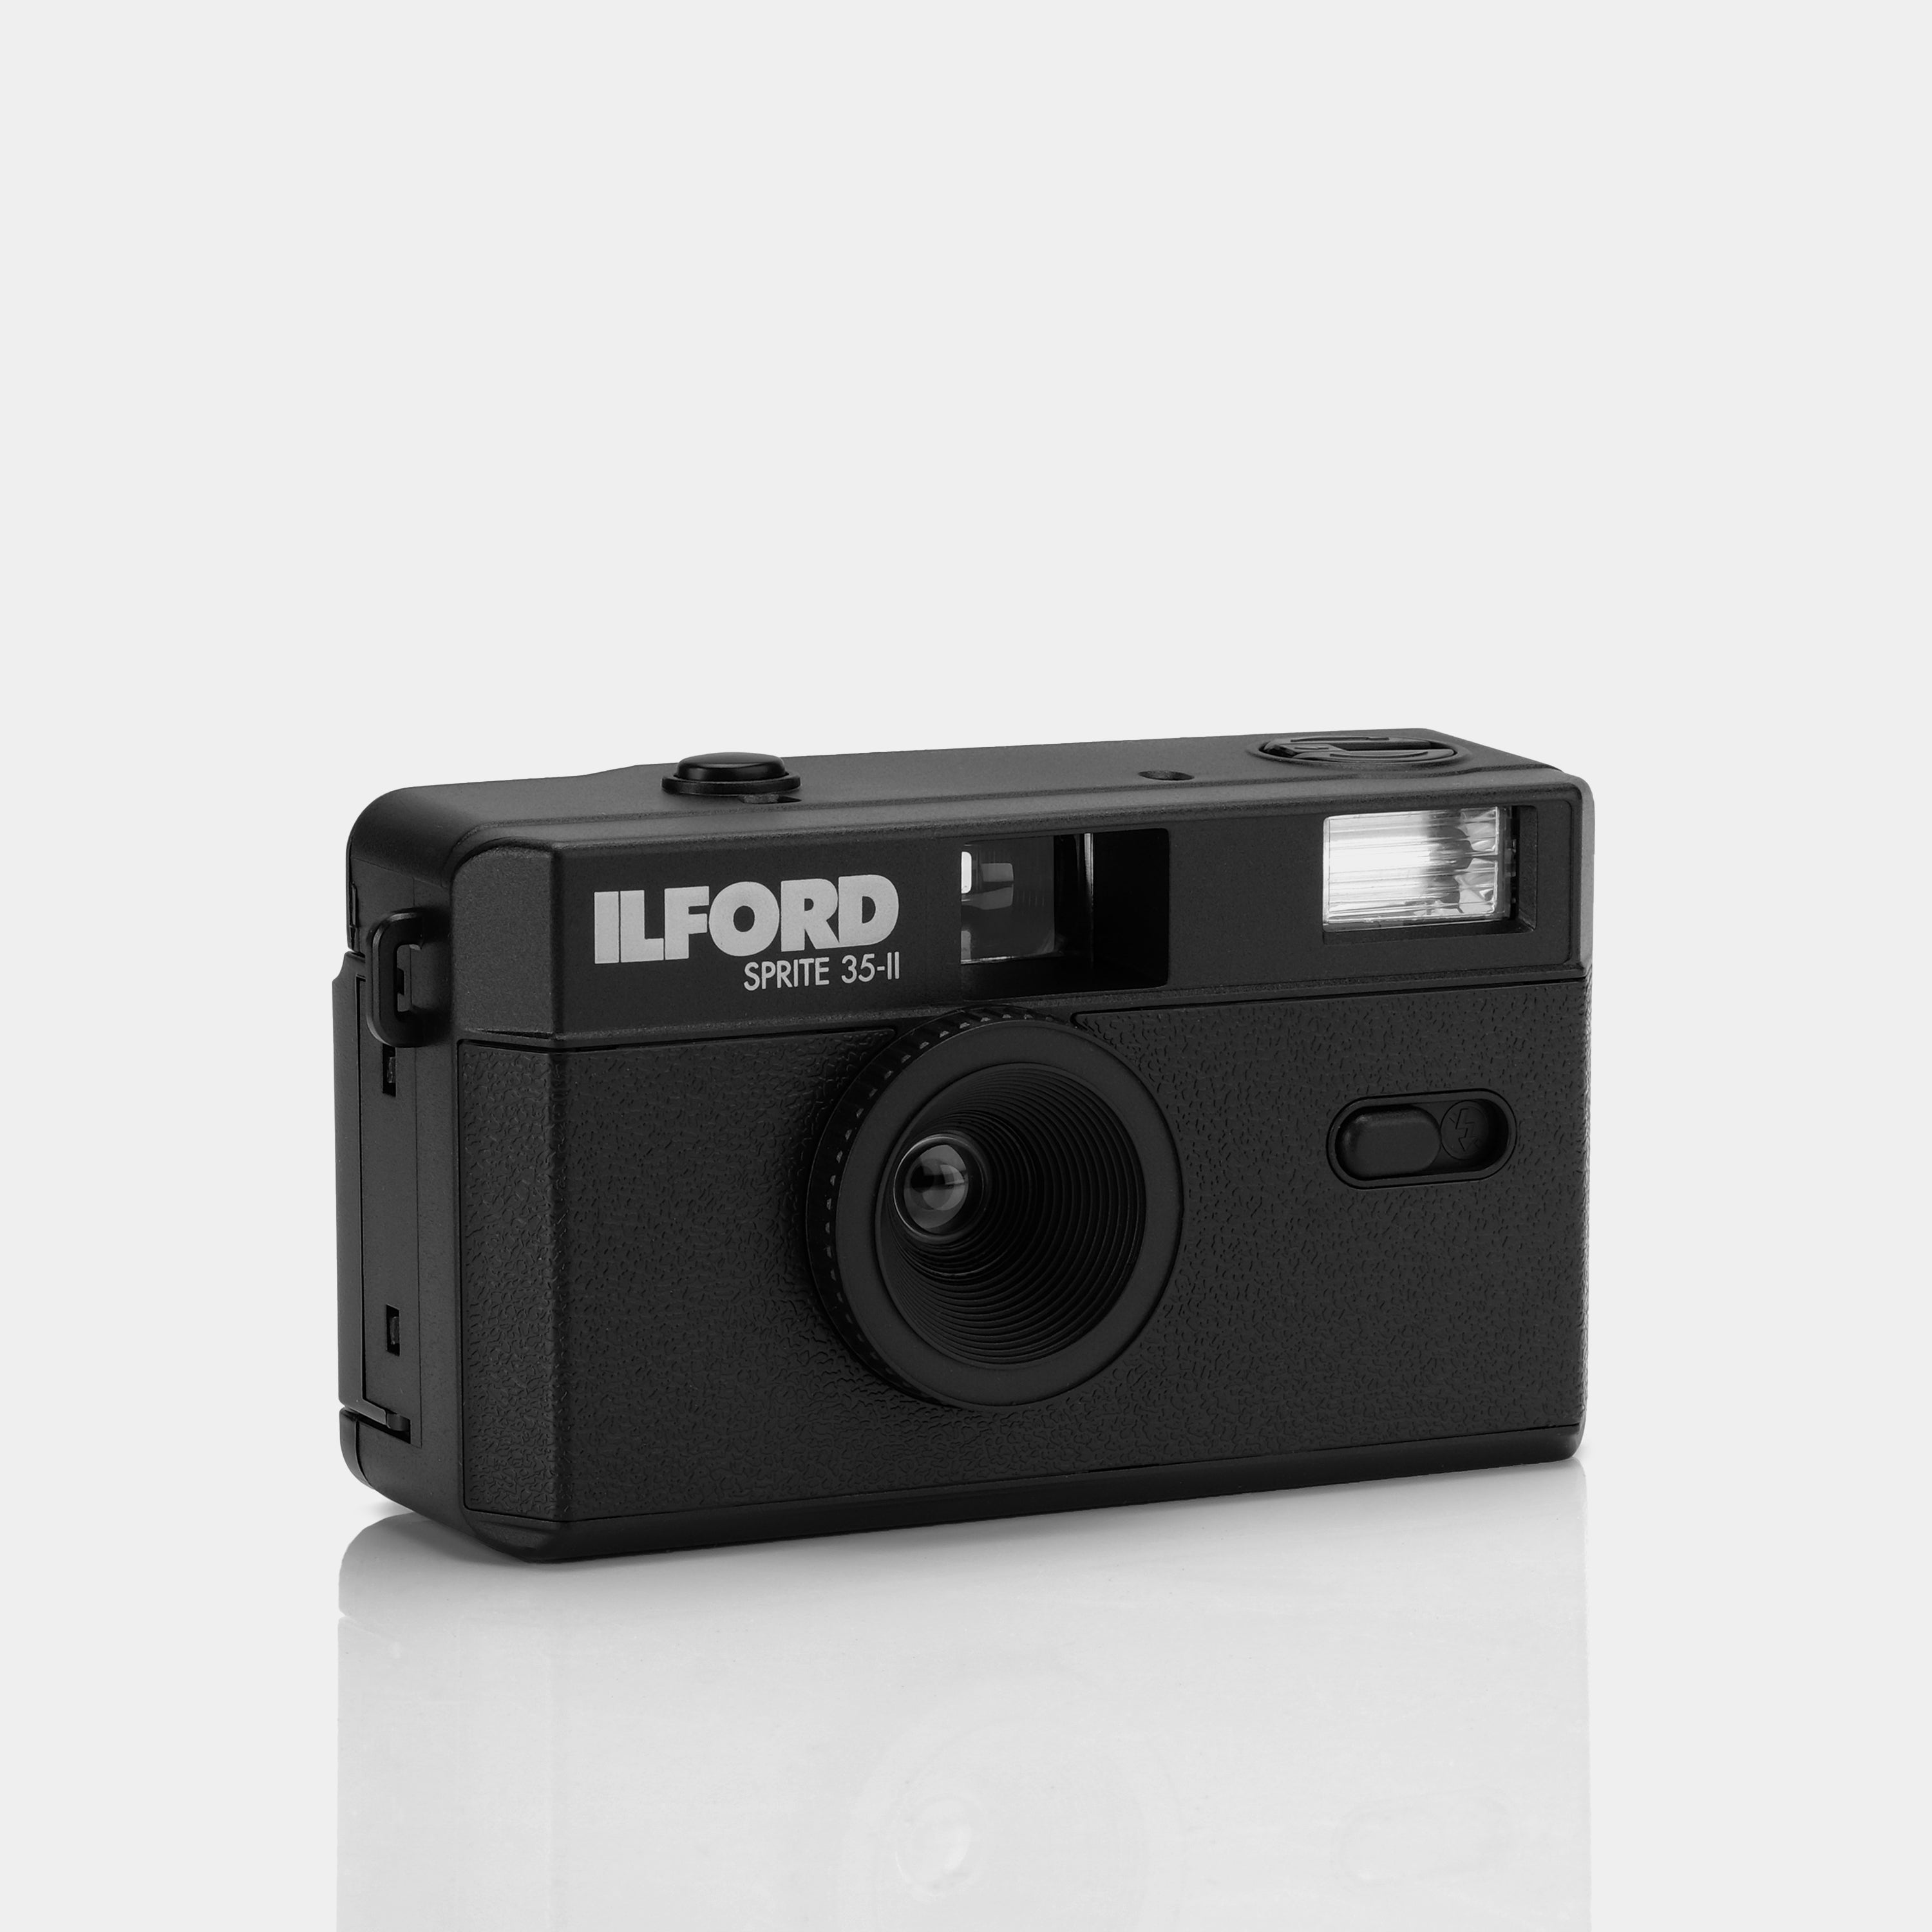 Ilford Sprite 35-II Reusable 35mm Point and Shoot Film Camera (Open-Box)